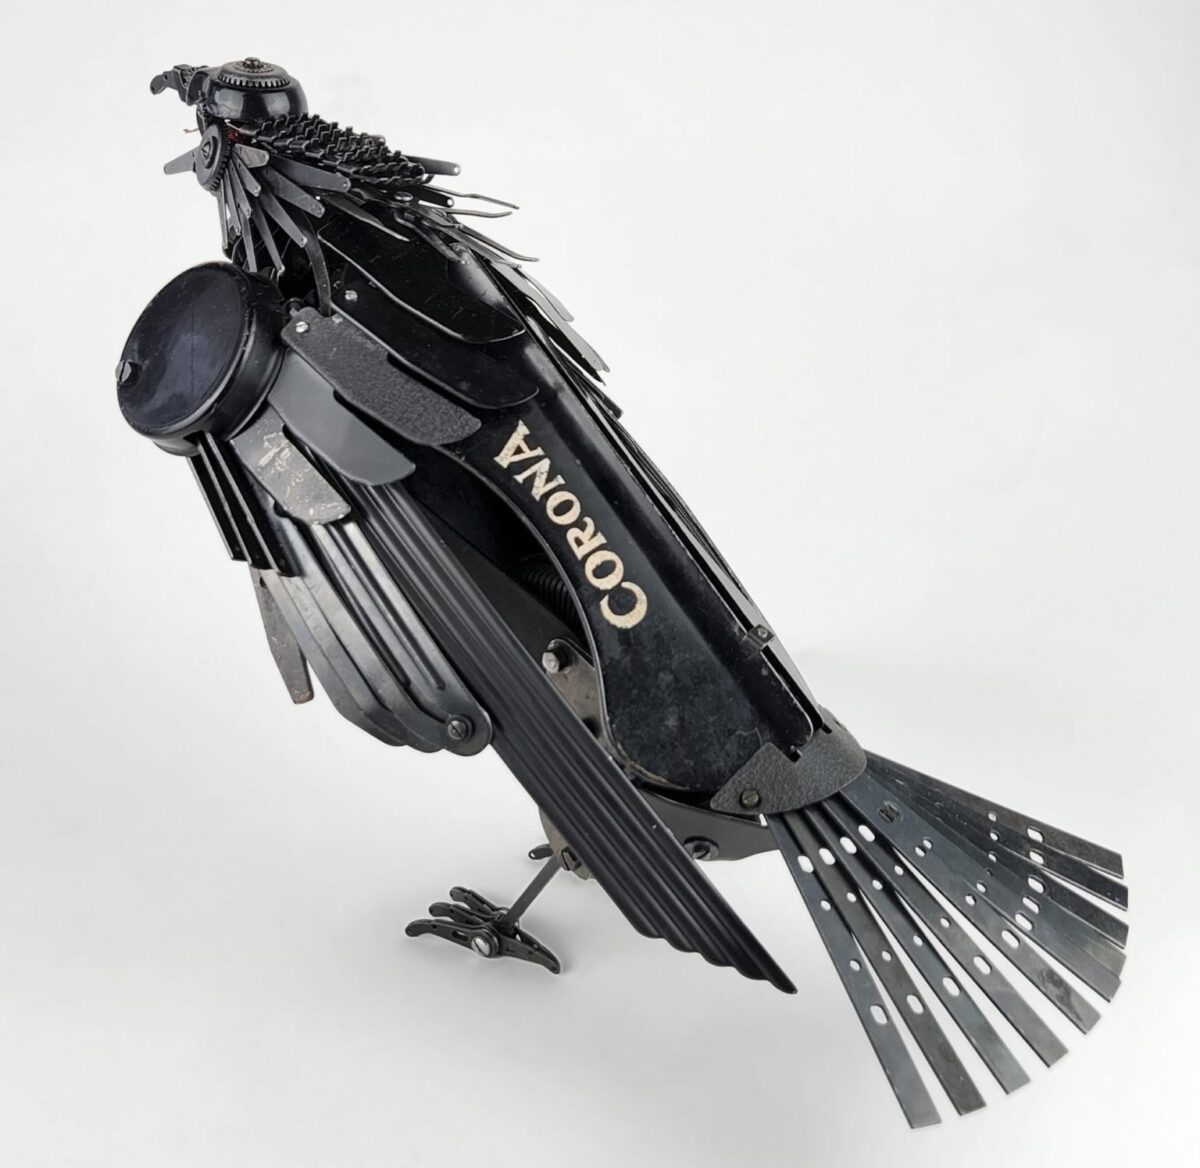 Incredible Animal Sculptures Made From Vintage Typewriters By Jeremy Mayer (5)